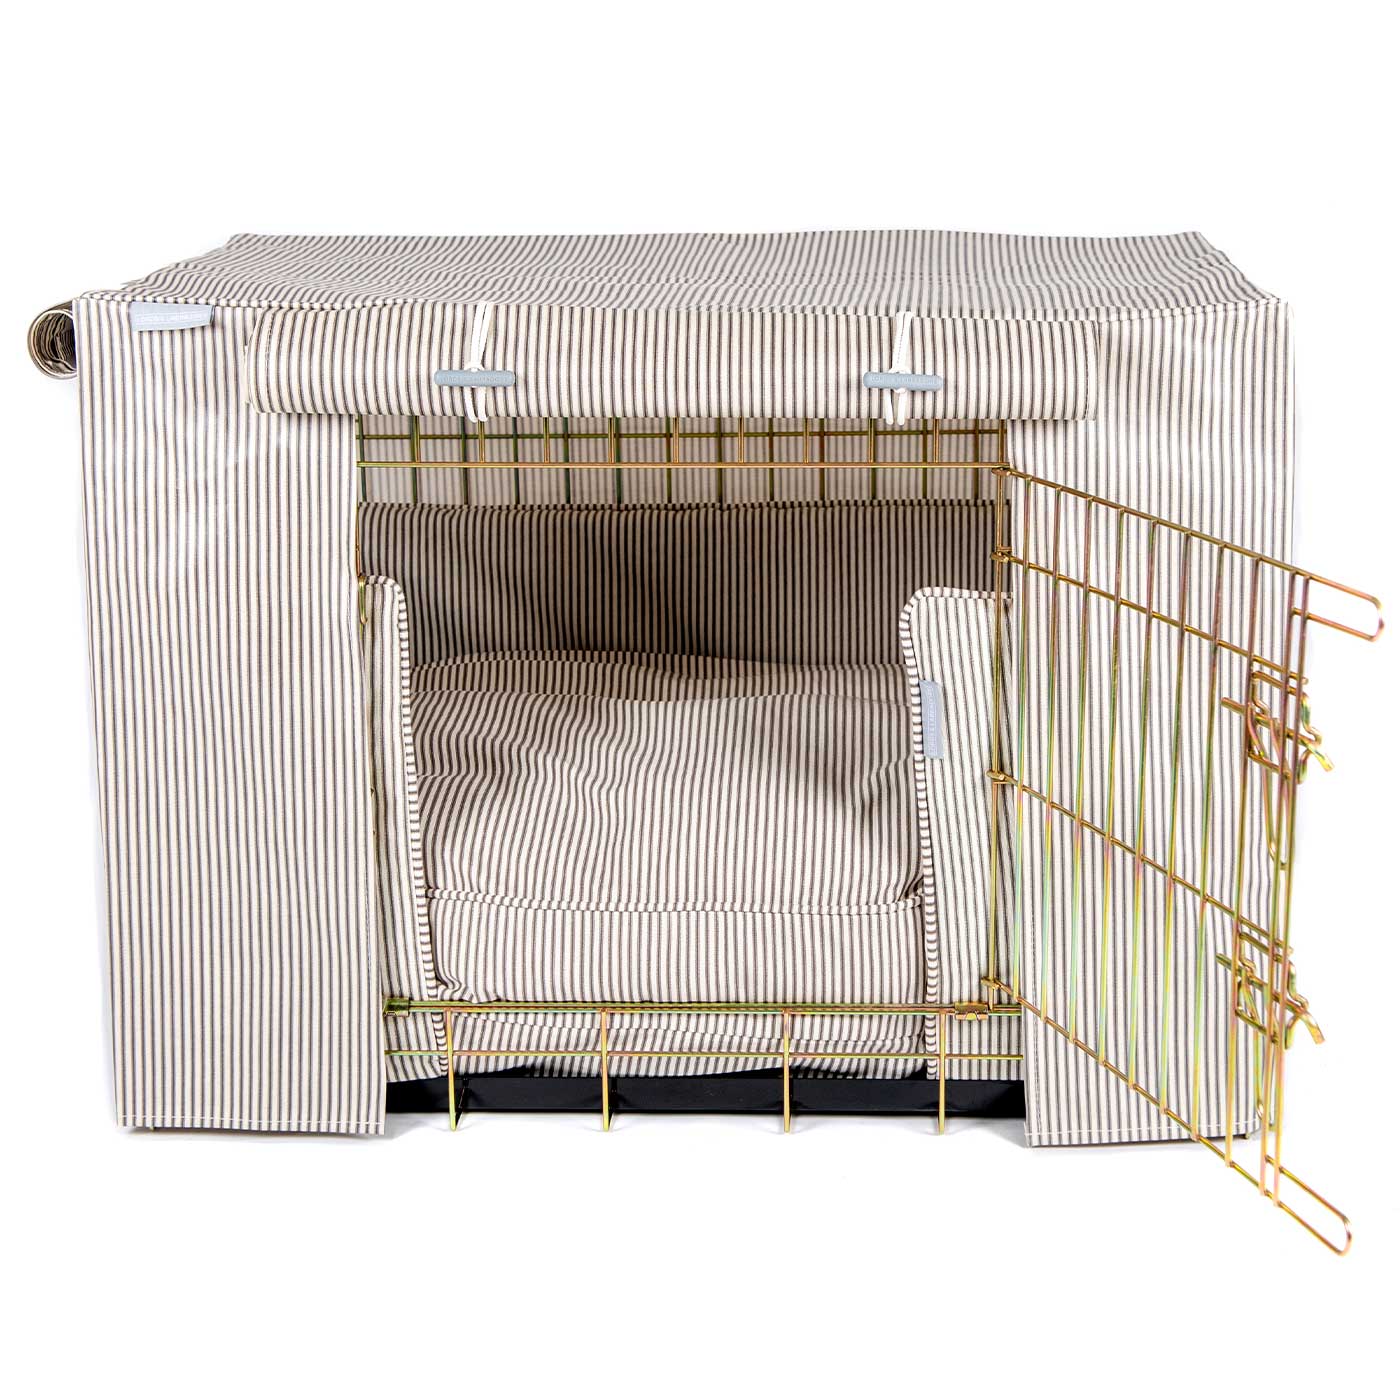 Luxury Gold Dog Cage Set With Cushion, Bumper and Cage Cover, In Regency Stripe Oil Cloth. The Perfect Dog Cage For The Ultimate Naptime, Available Now at Lords & Labradors US